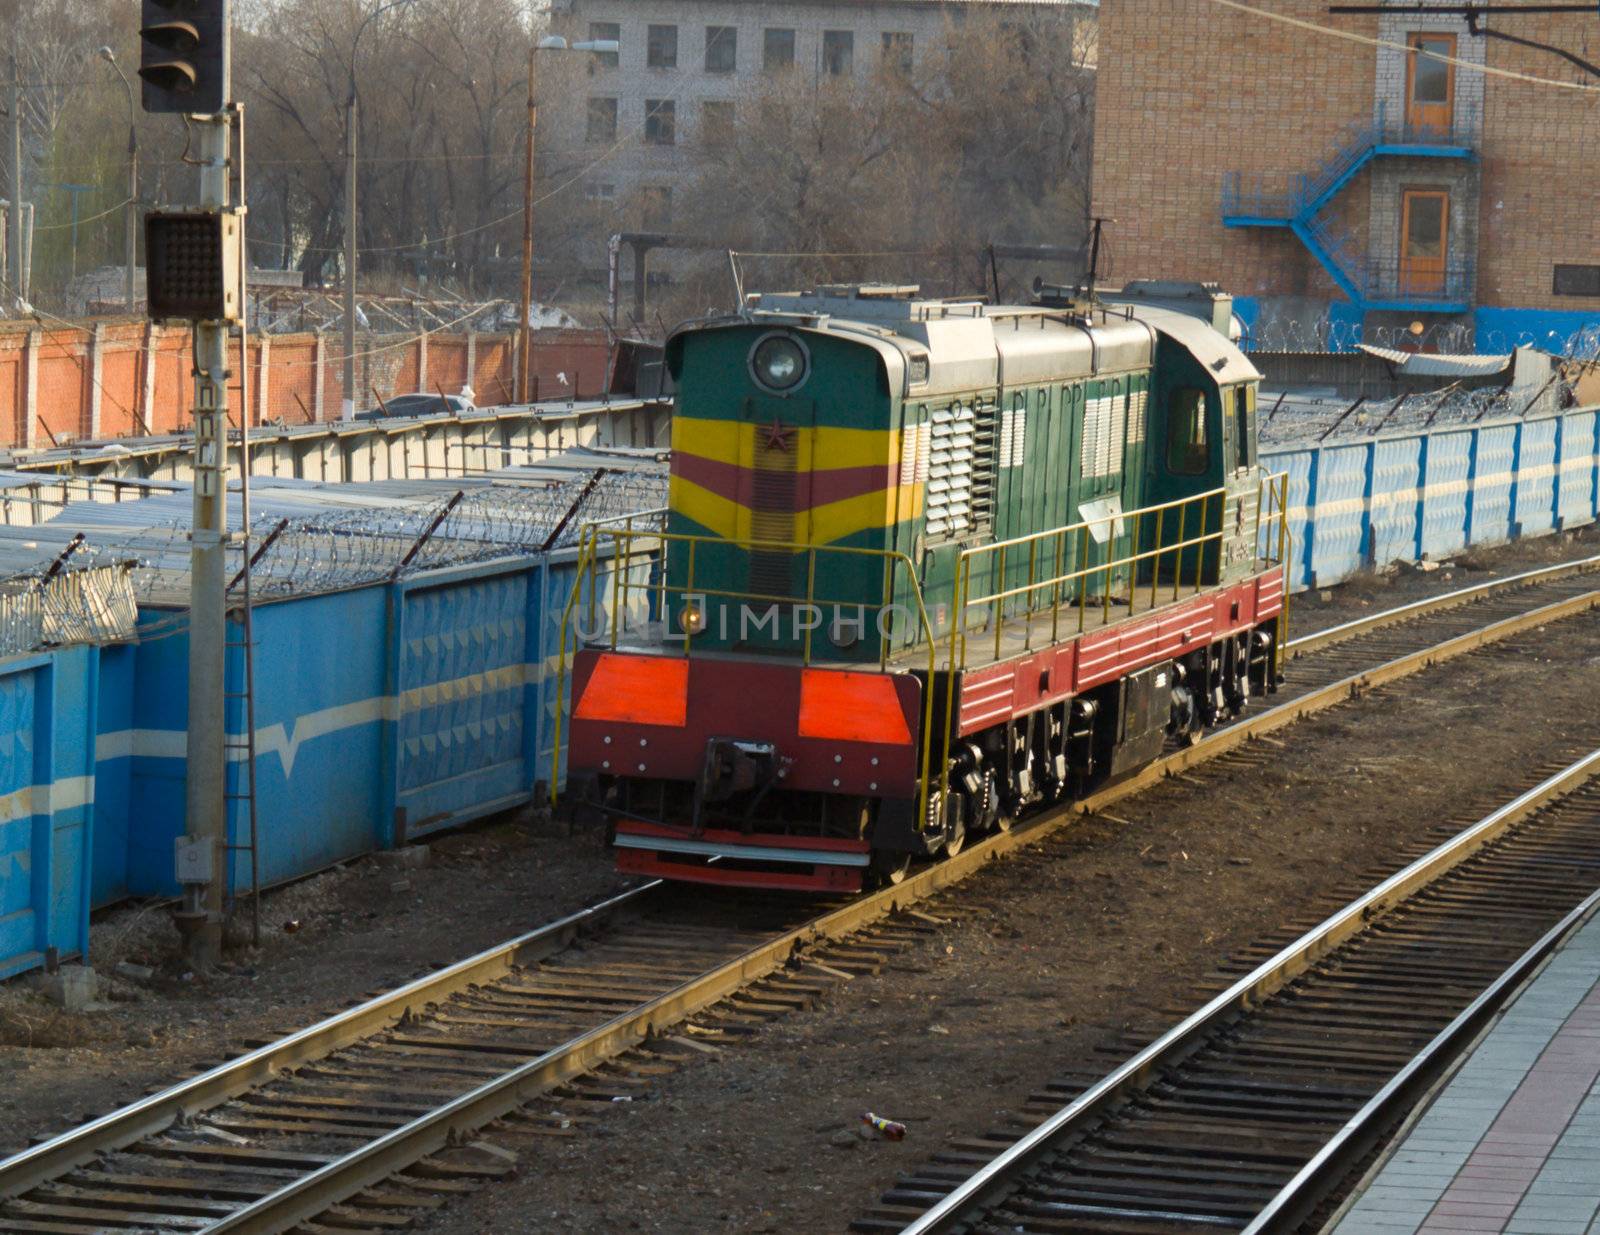 The old diesel locomotive of green colour moves on rails